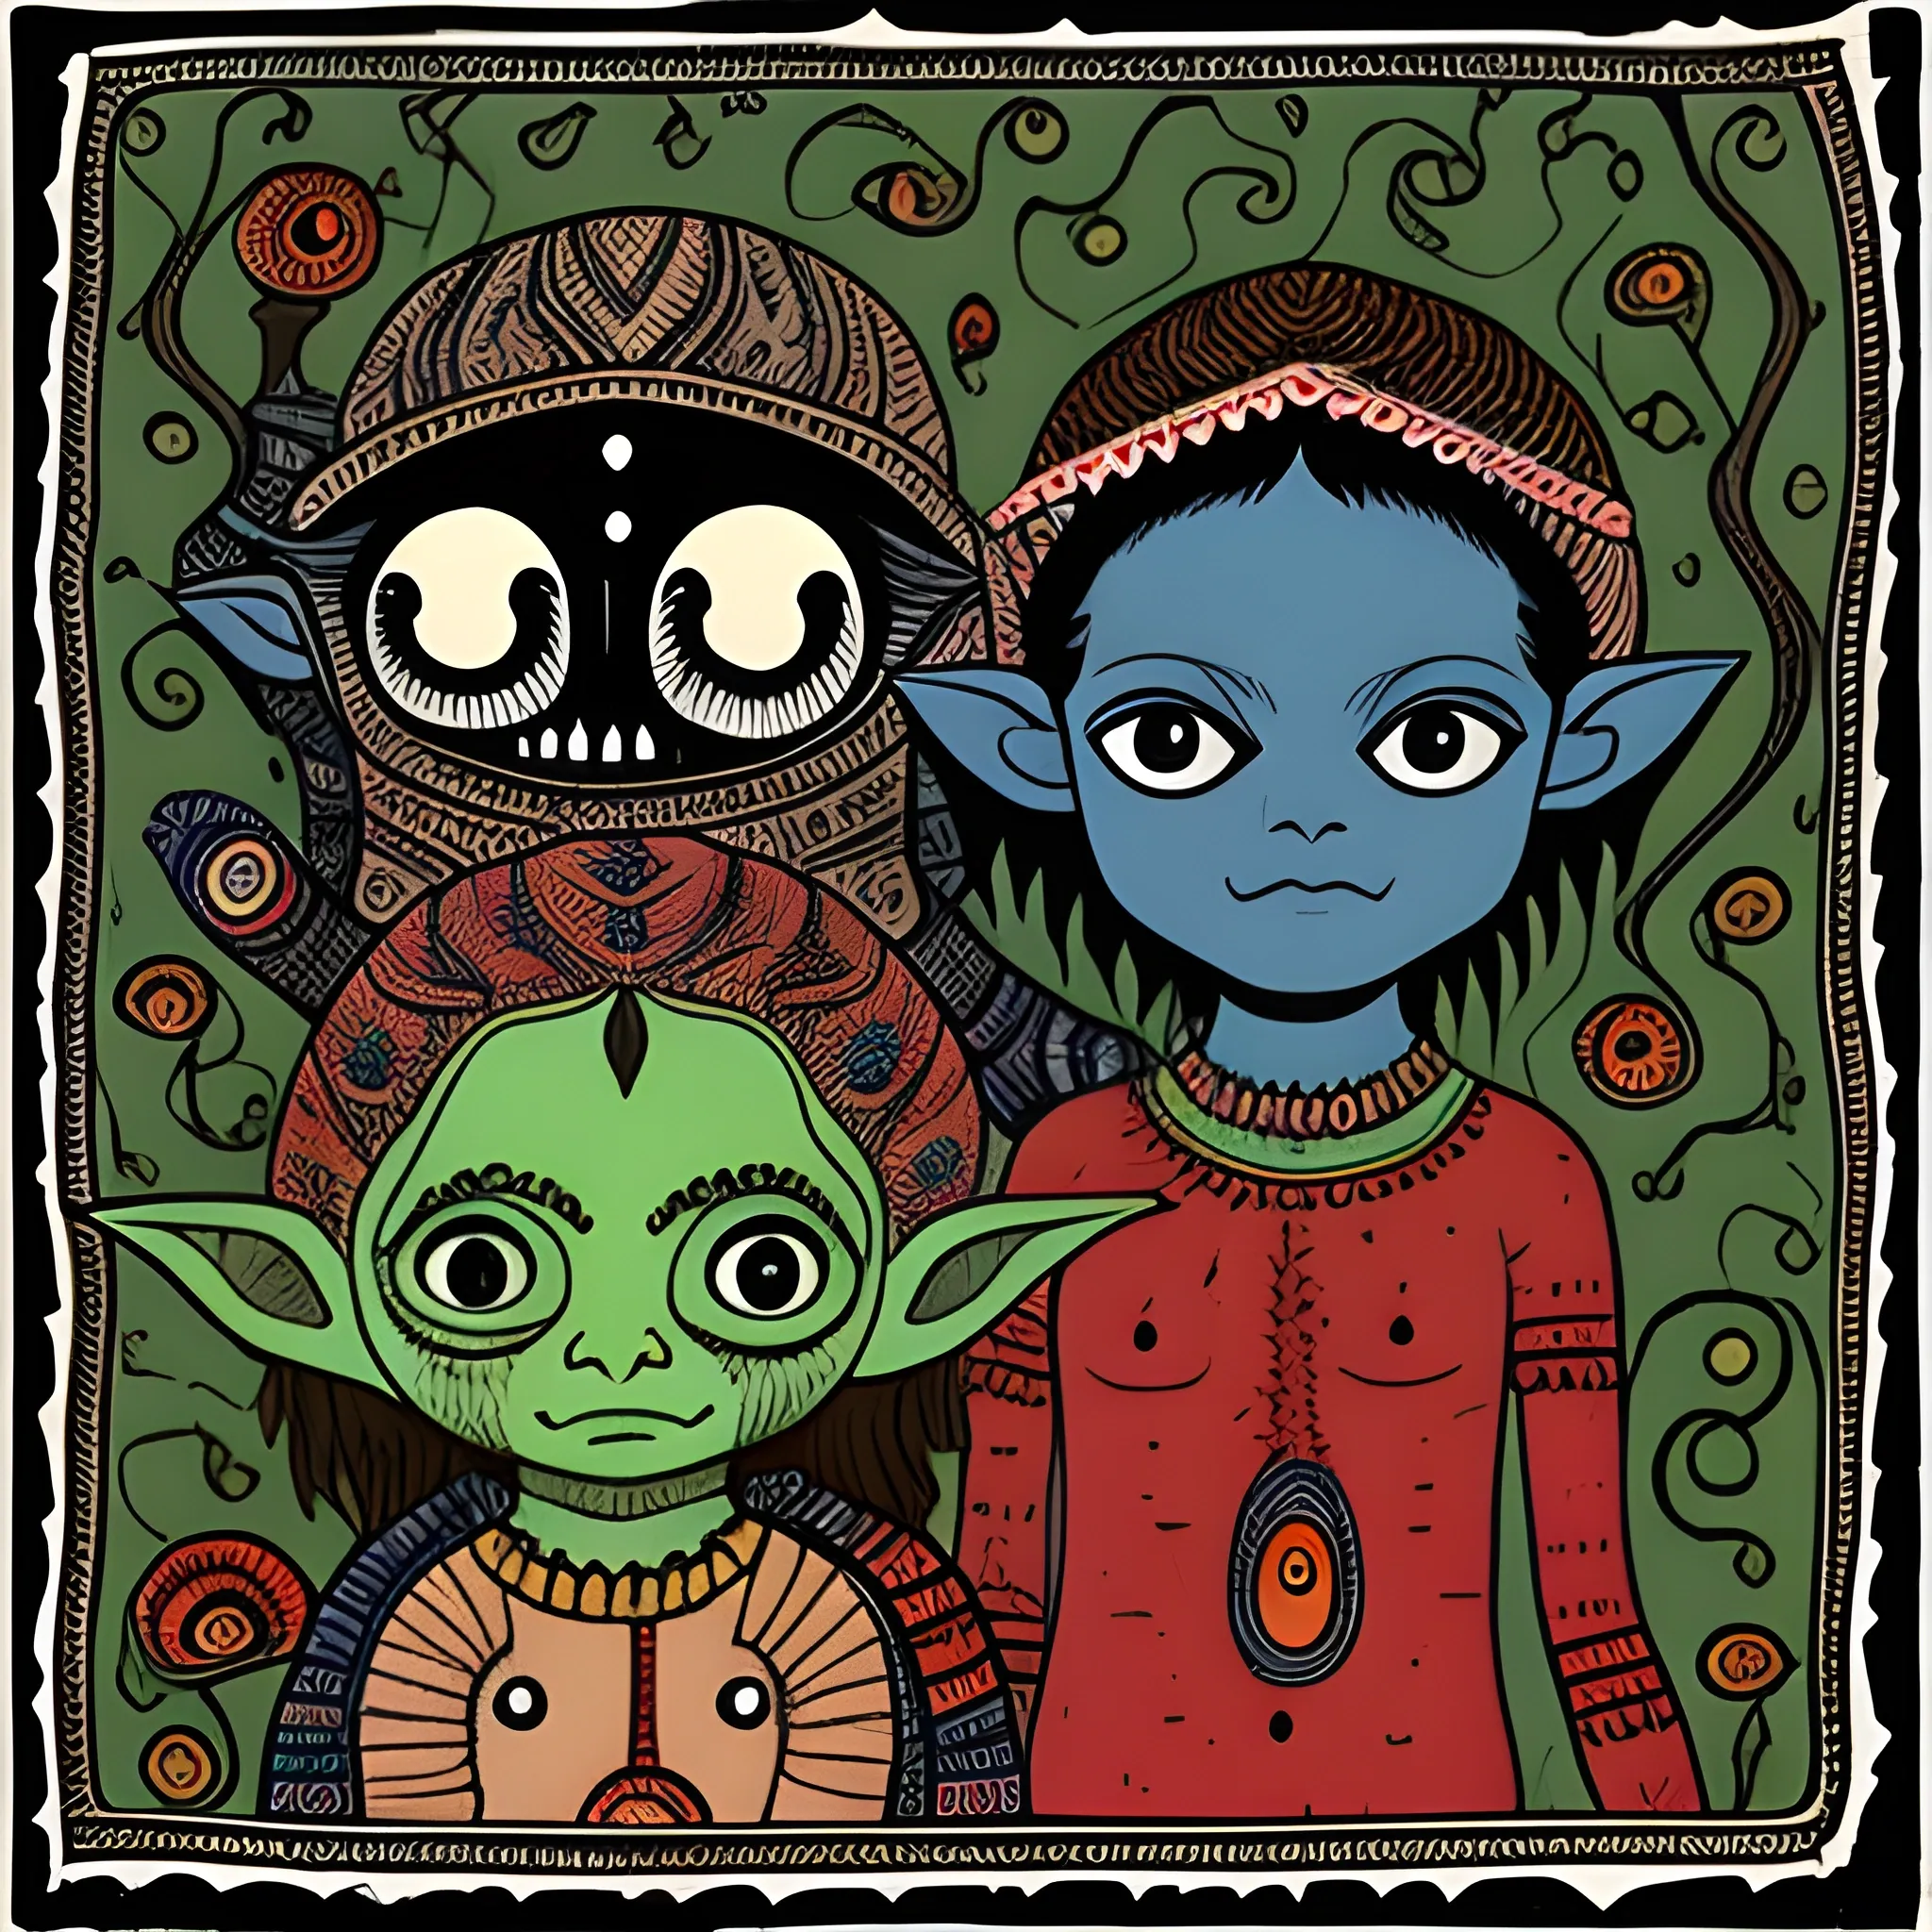 Encapsulation Sibling Adventure: into the deep goblin caves, dark ambiance, lurking horror, in the style of Madhubani painting,